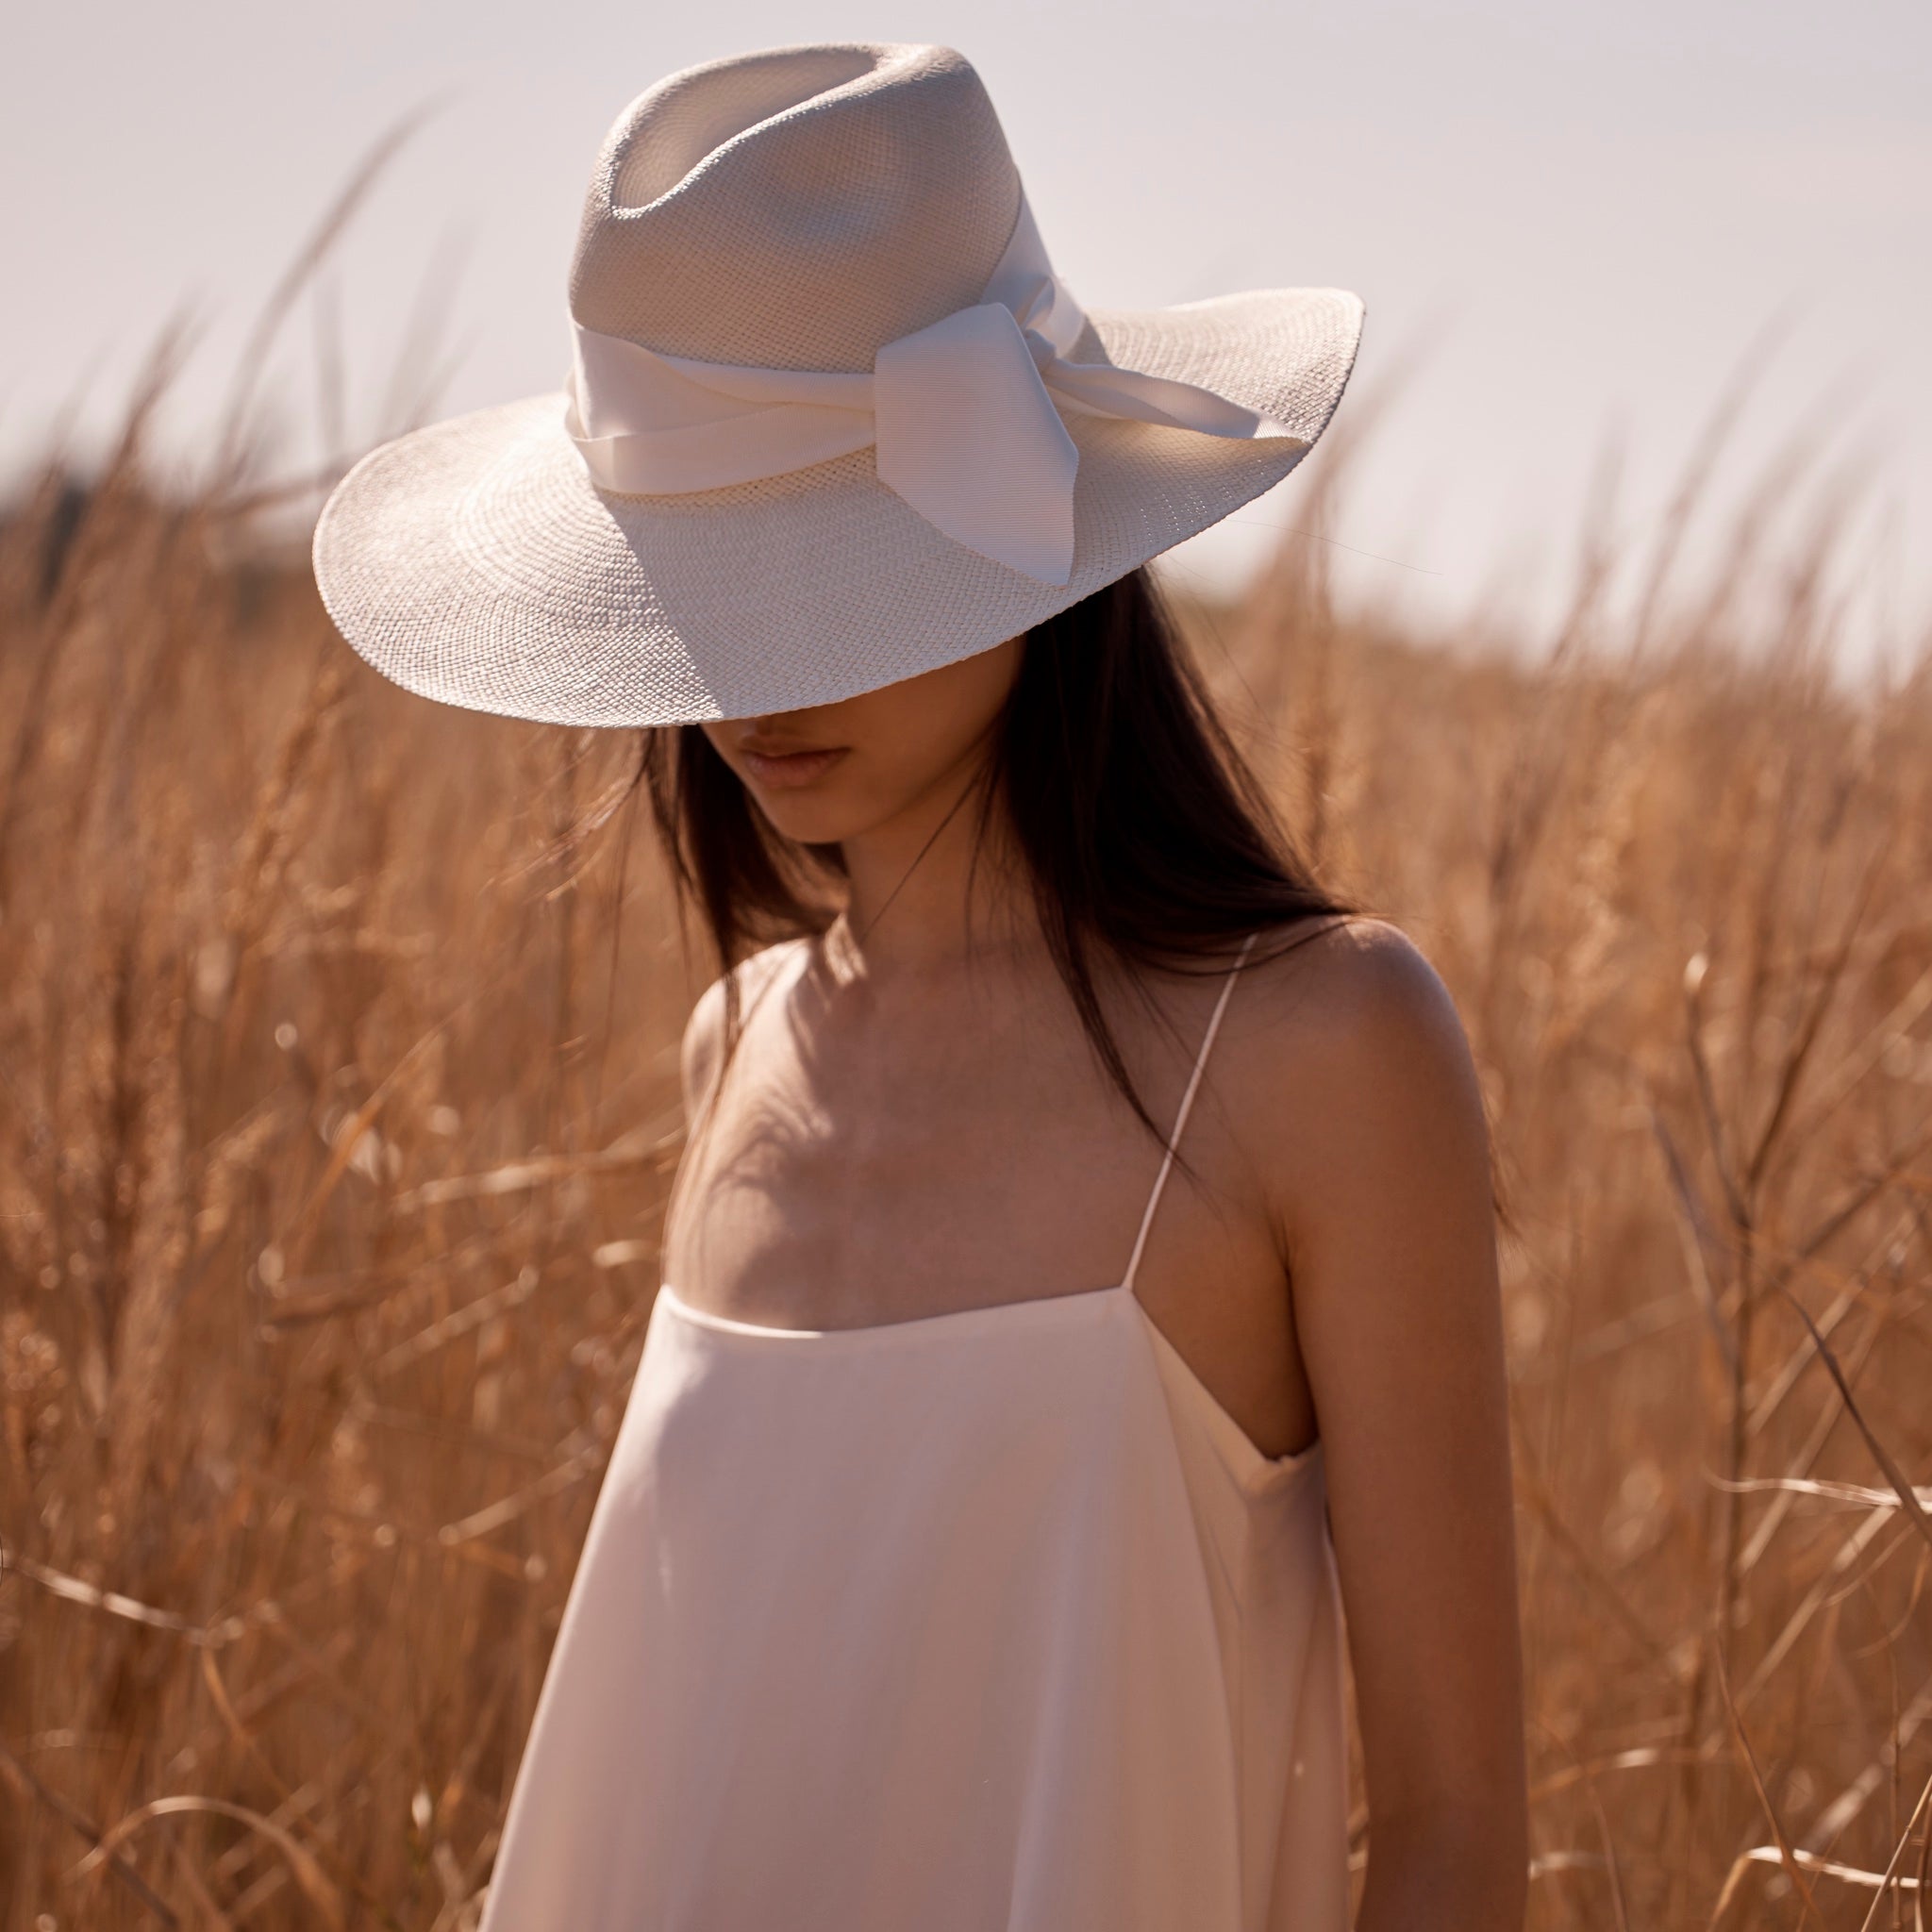 Especially For Summer Panama Hat